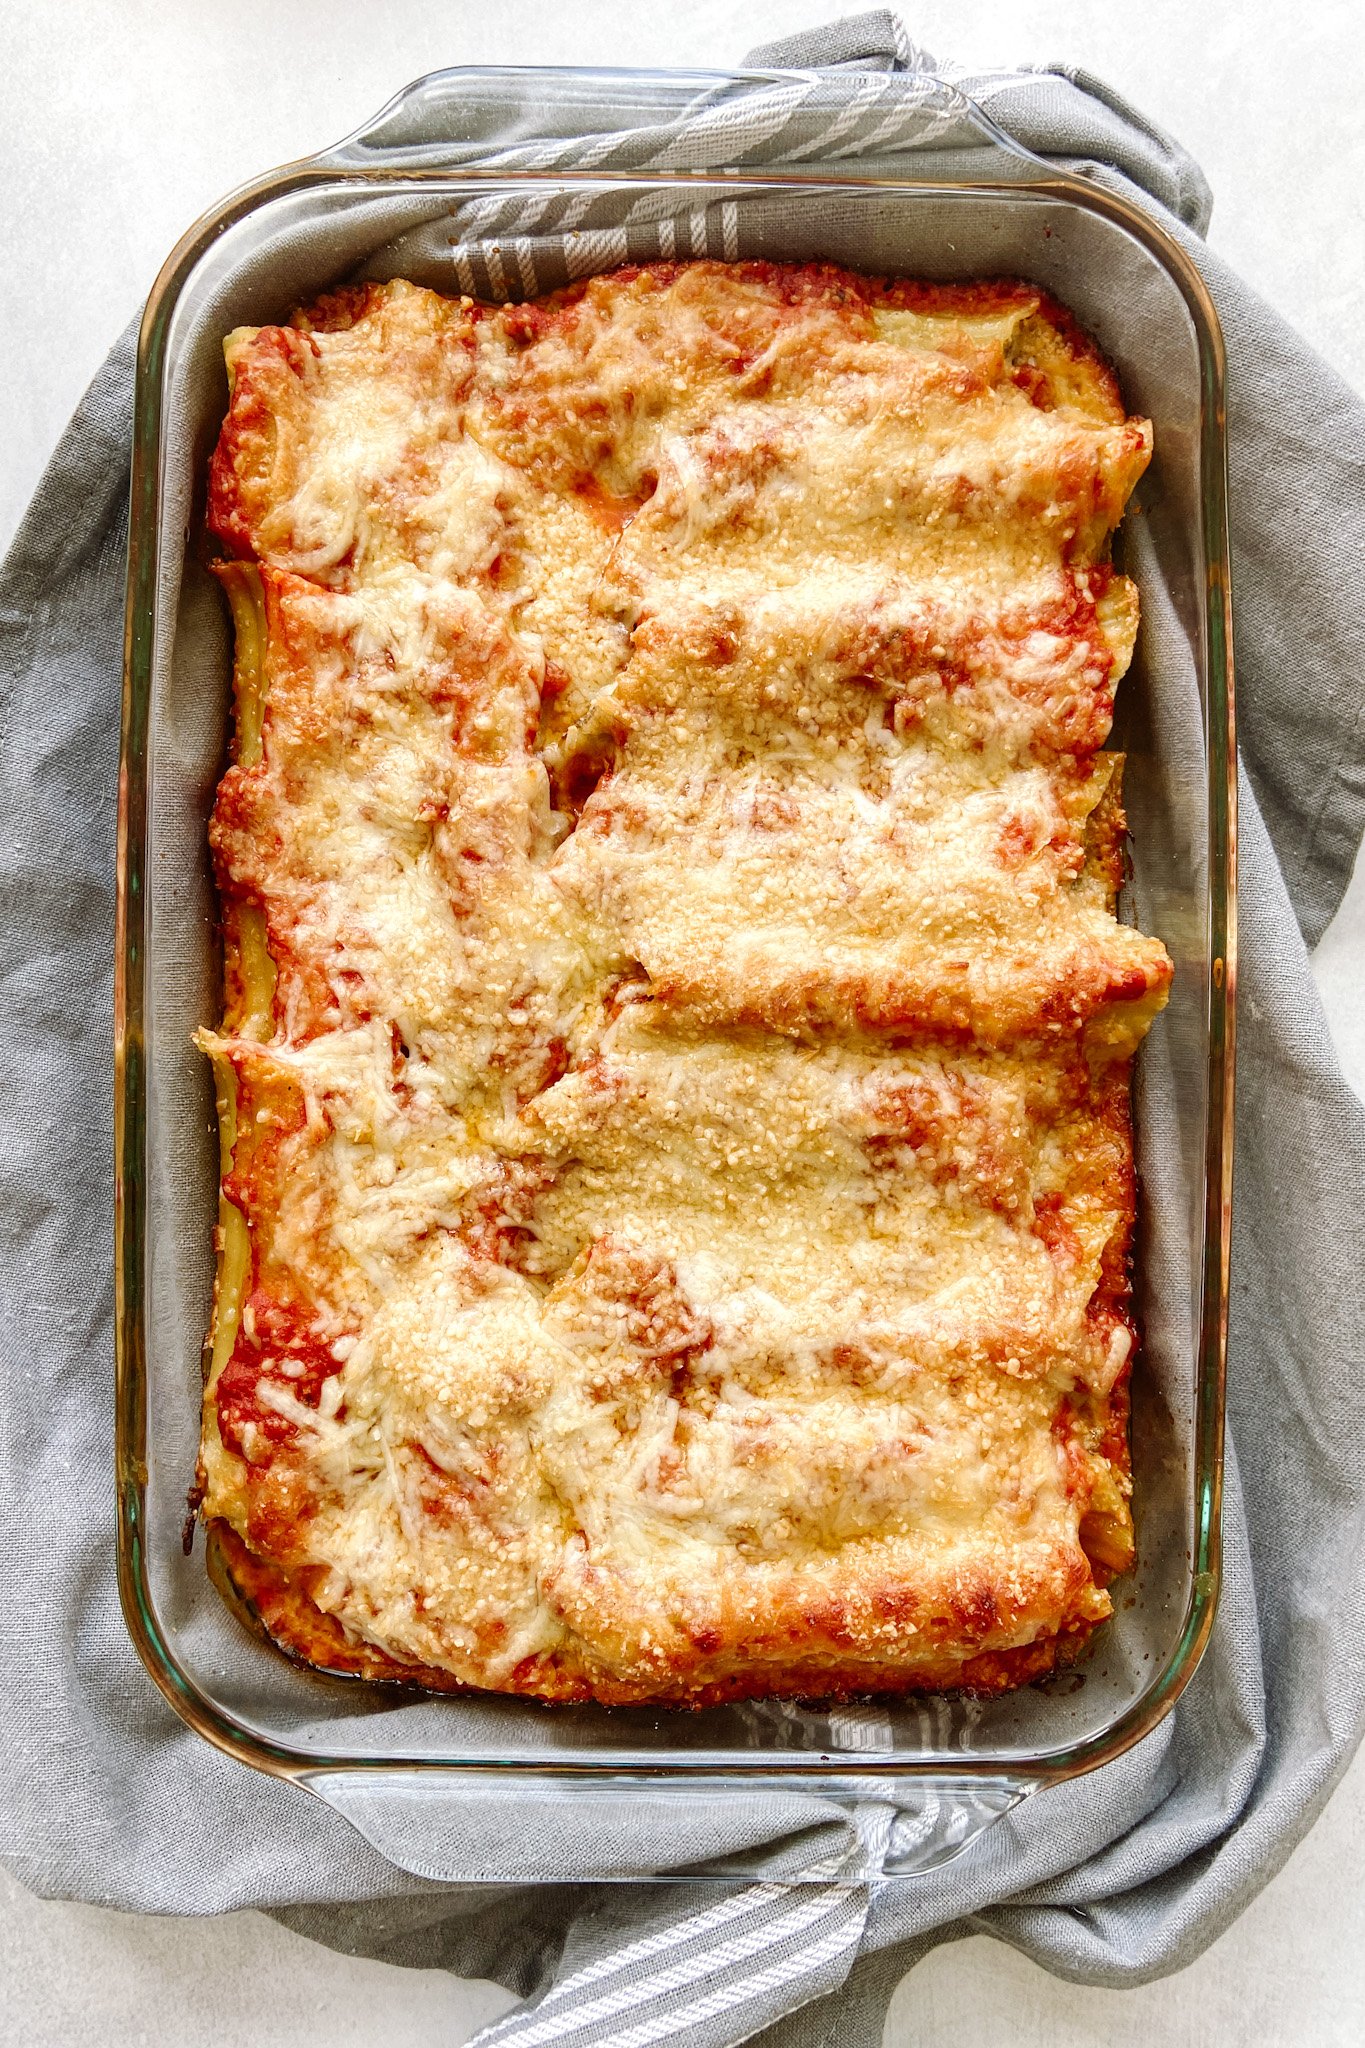 Cheesy beef manicotti fresh out of the oven